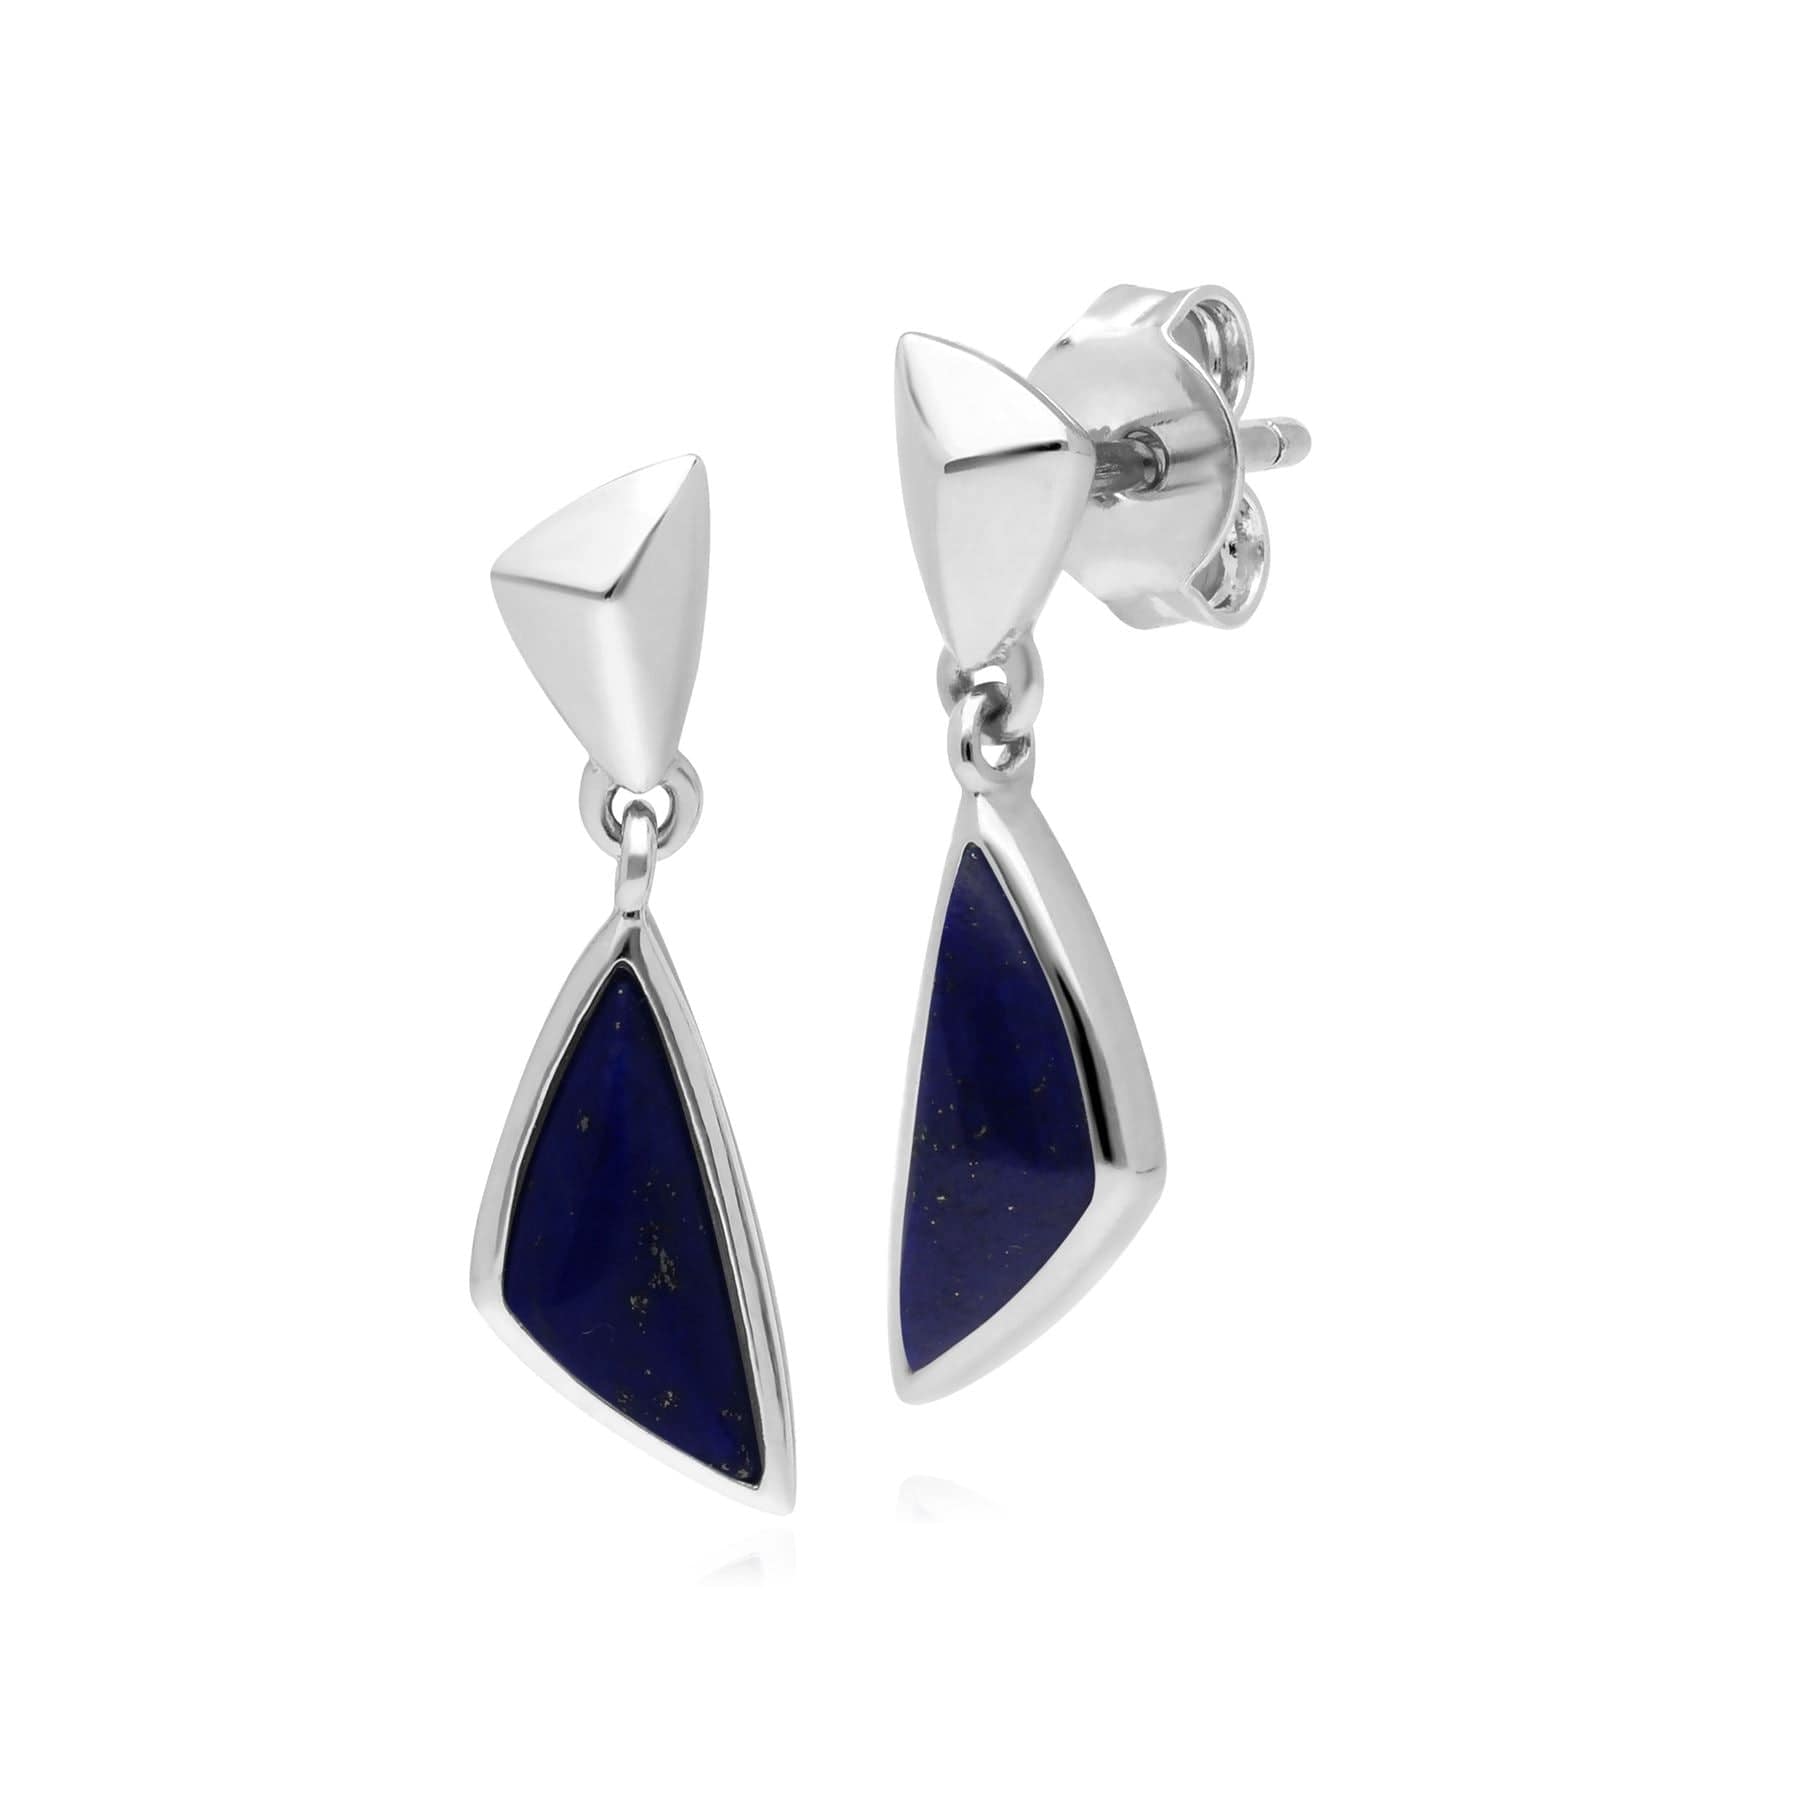 Image of Micro Statement Lapis Lazuli Drop Earrings in Sterling Silver